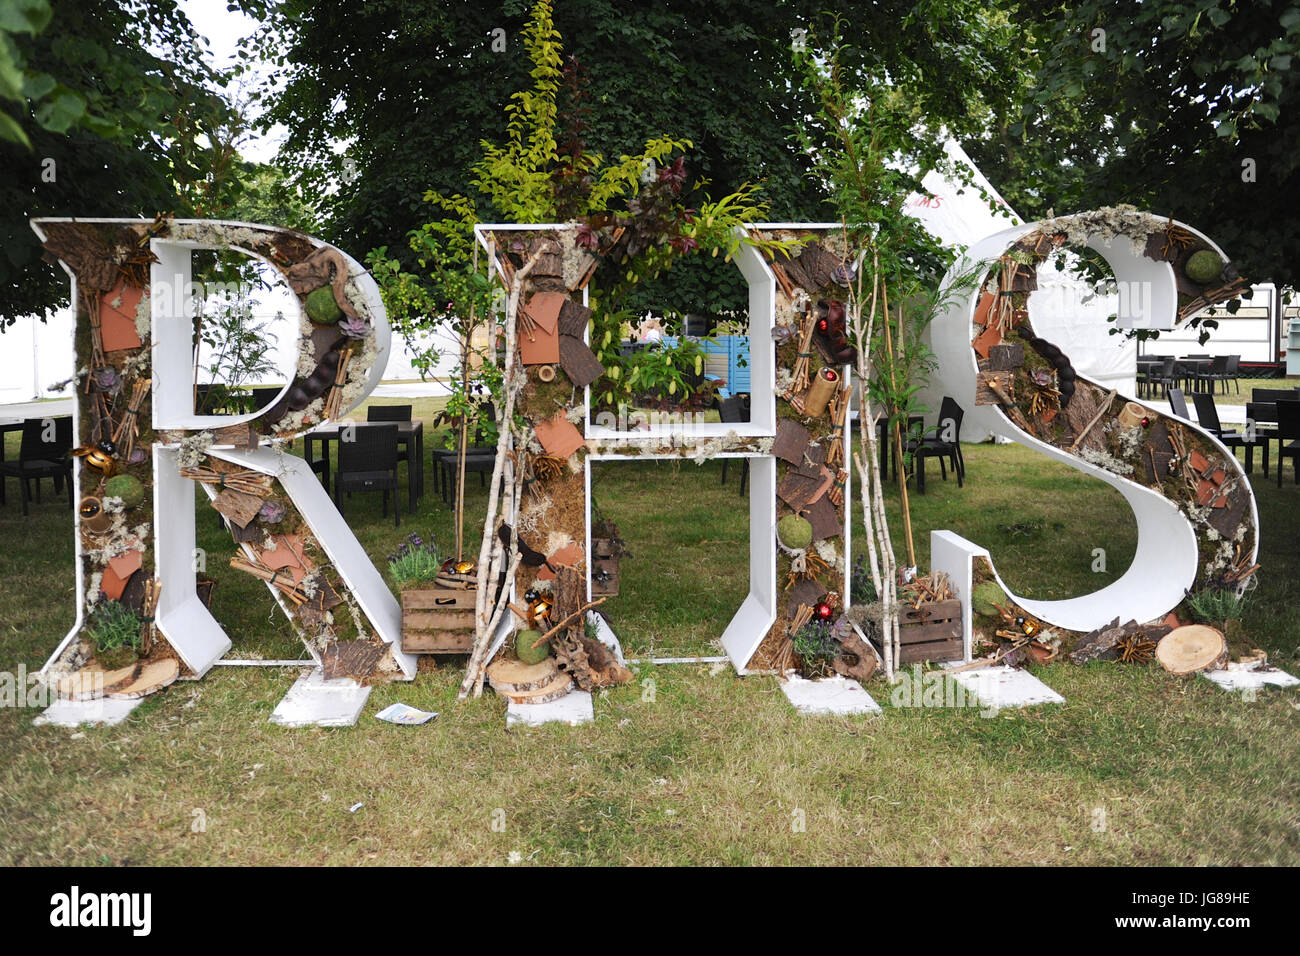 A rustic Royal Horticultural Society logo on display on display at the 2017 RHS Hampton Court Flower Show which opened today in the grounds of Hampton Court Palace, London, United Kingdom.  The RHS Hampton Court Palace Flower Show is the world’s largest flower show boasting an eclectic mix of gardens, displays and shopping opportunities spanning over 34 acres either side of the dramatic long water with the stunning façade of the historical palace in the background. Around 130,000 people attend the show each year.  The show was first held in 1990 and created by Historic Royal Palaces and Networ Stock Photo